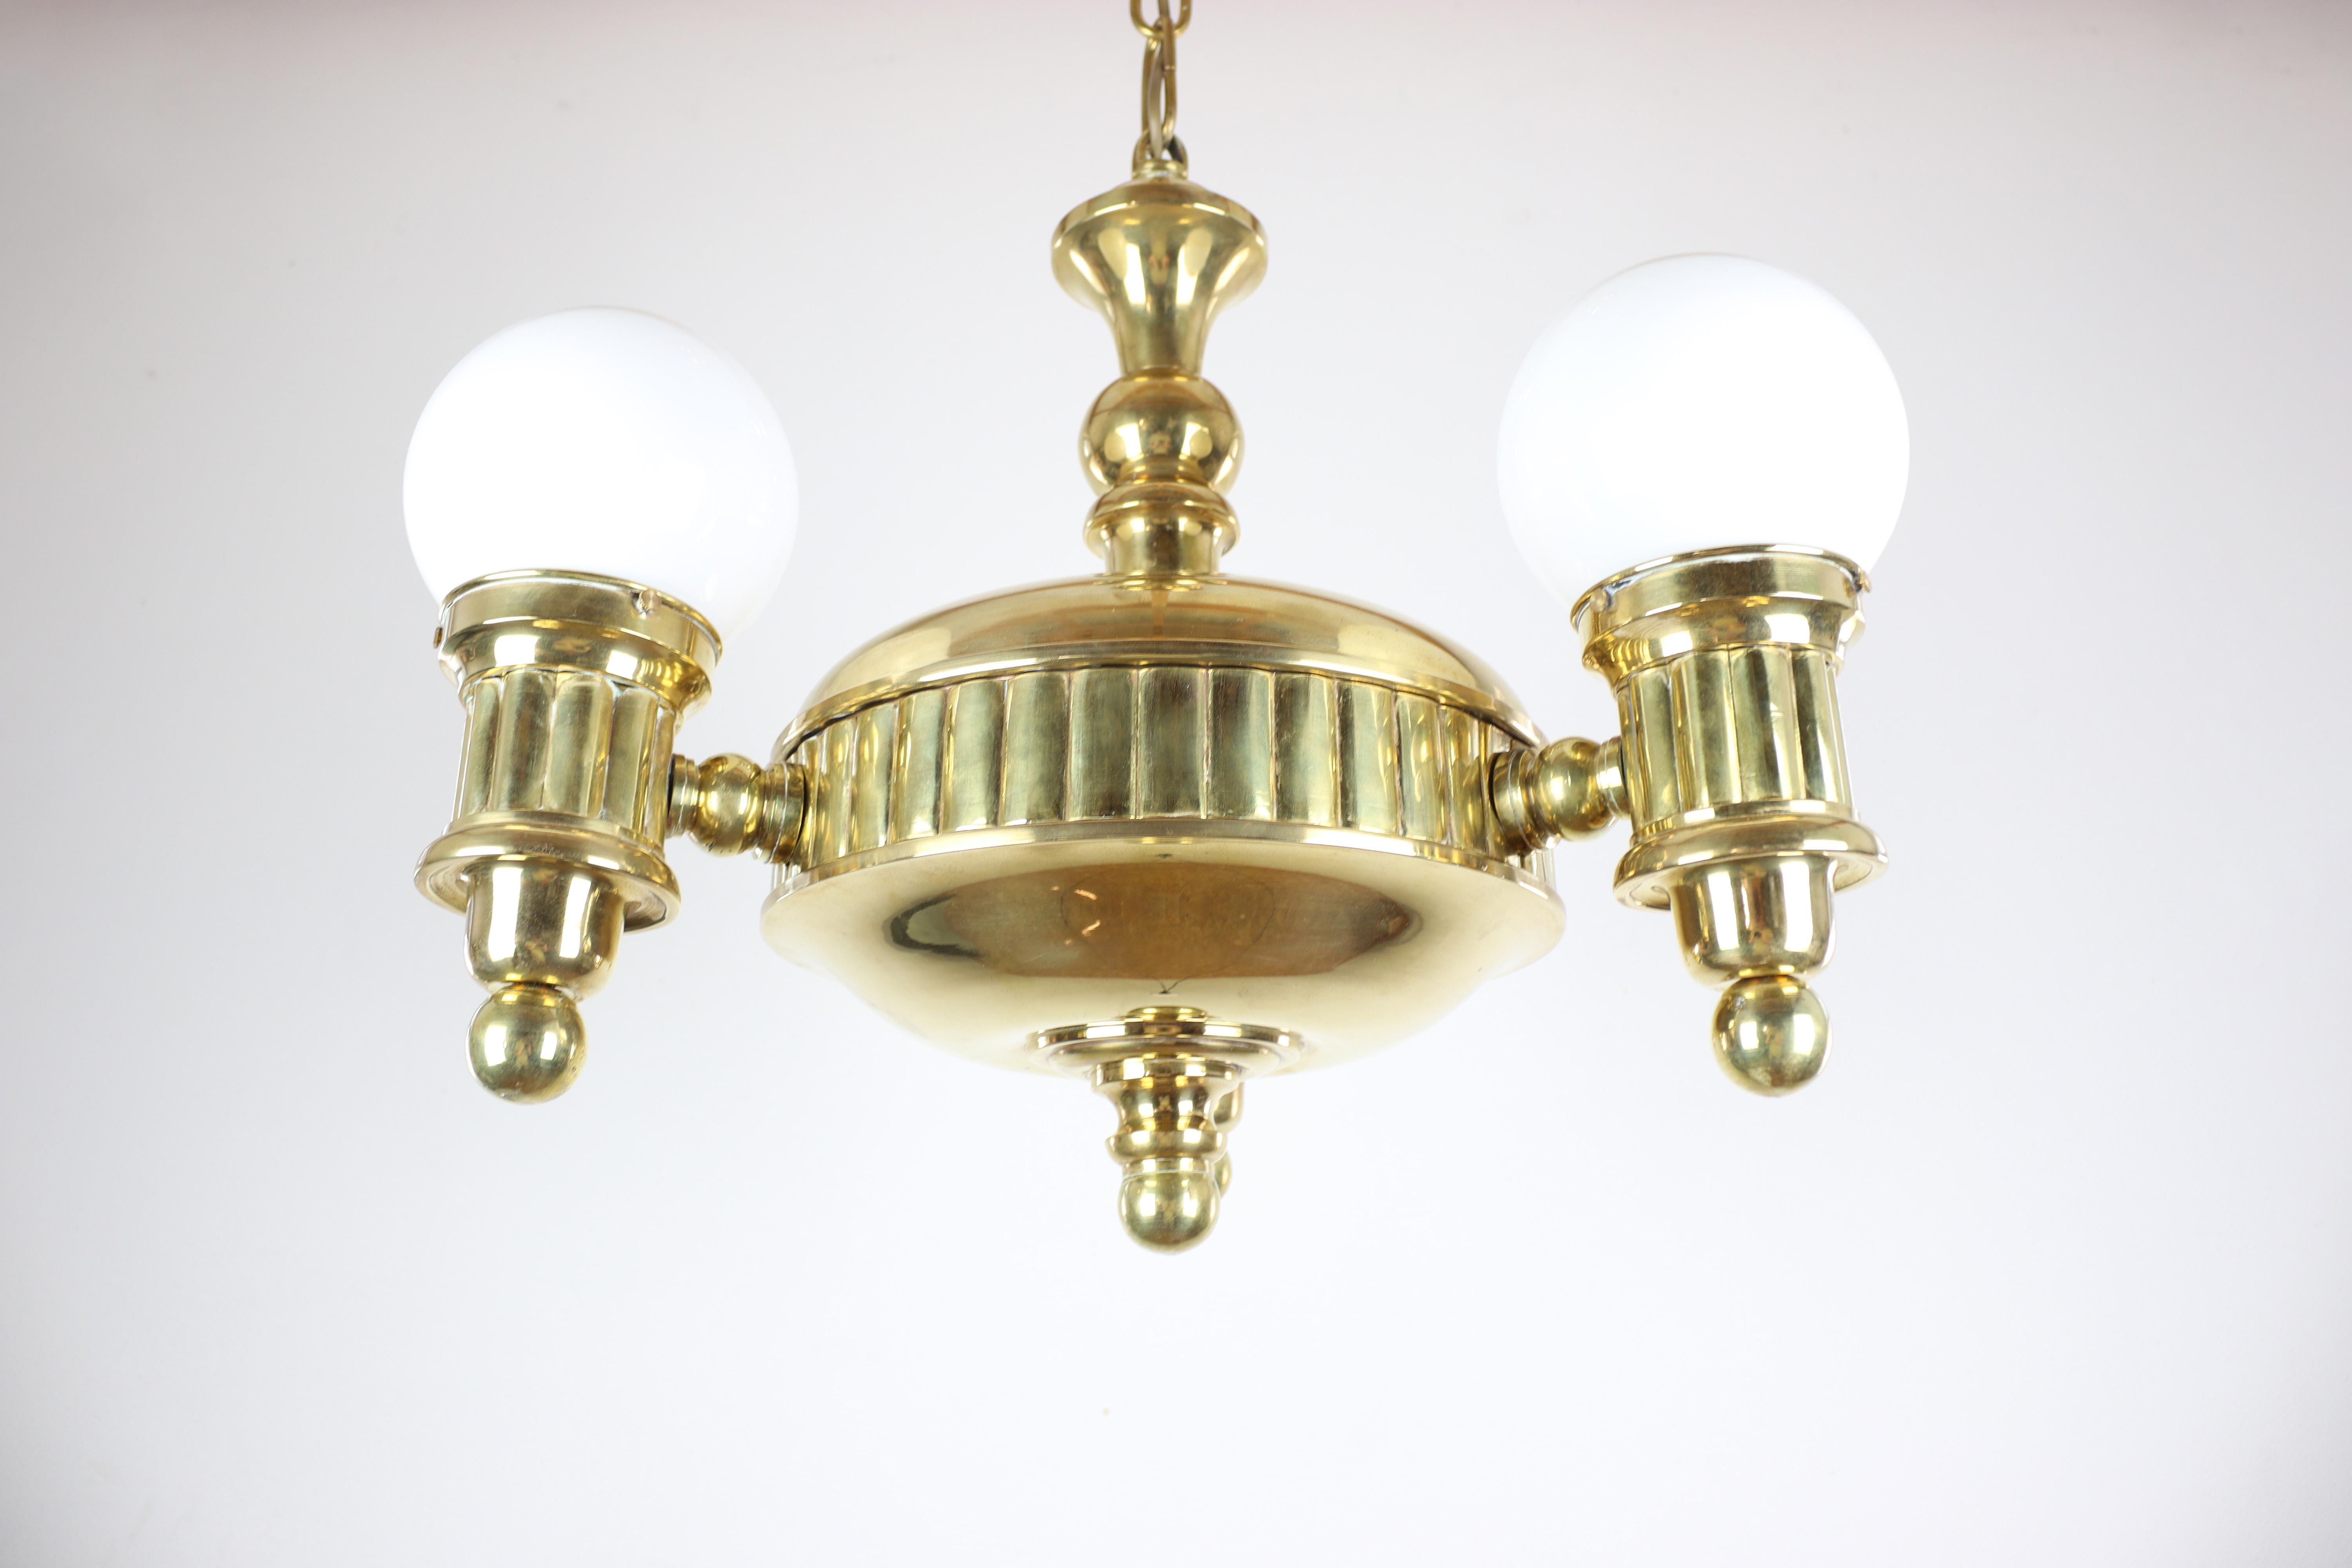 Brass Exclusive Art Deco Chandelier with Swivel Arms 'Three-Arm Design' For Sale